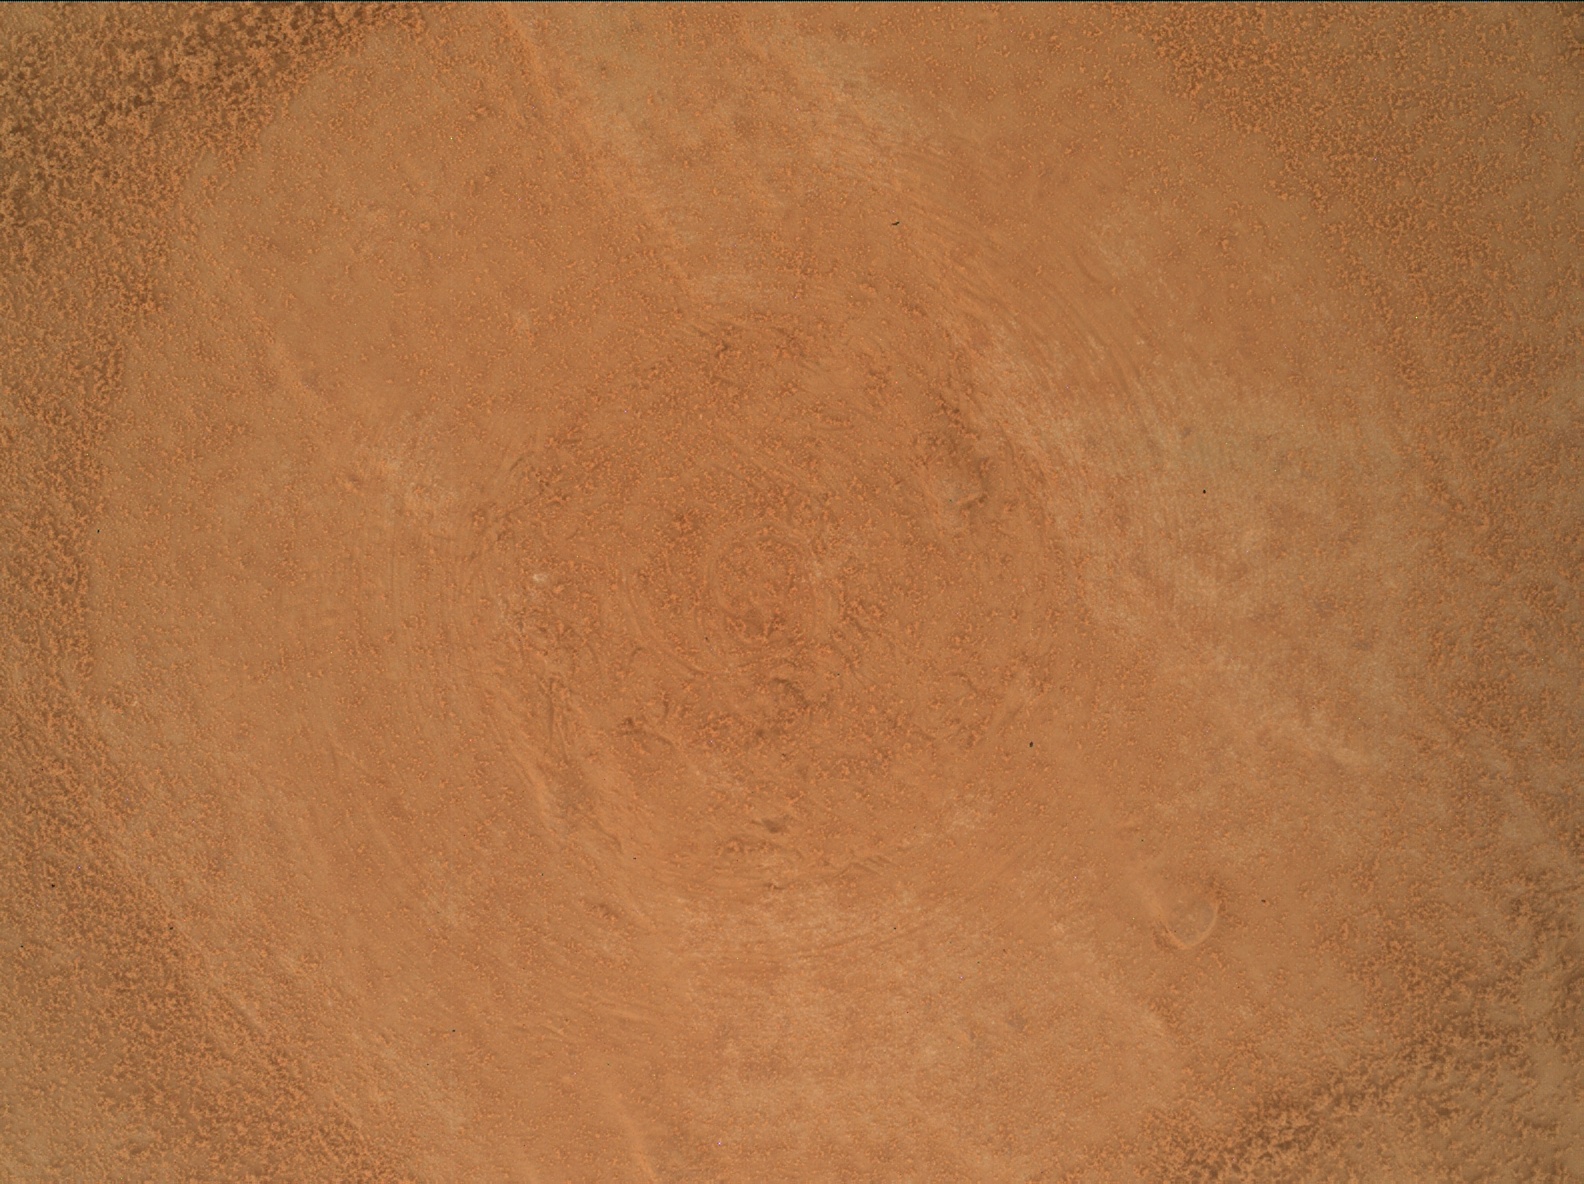 Nasa's Mars rover Curiosity acquired this image using its Mars Hand Lens Imager (MAHLI) on Sol 3546